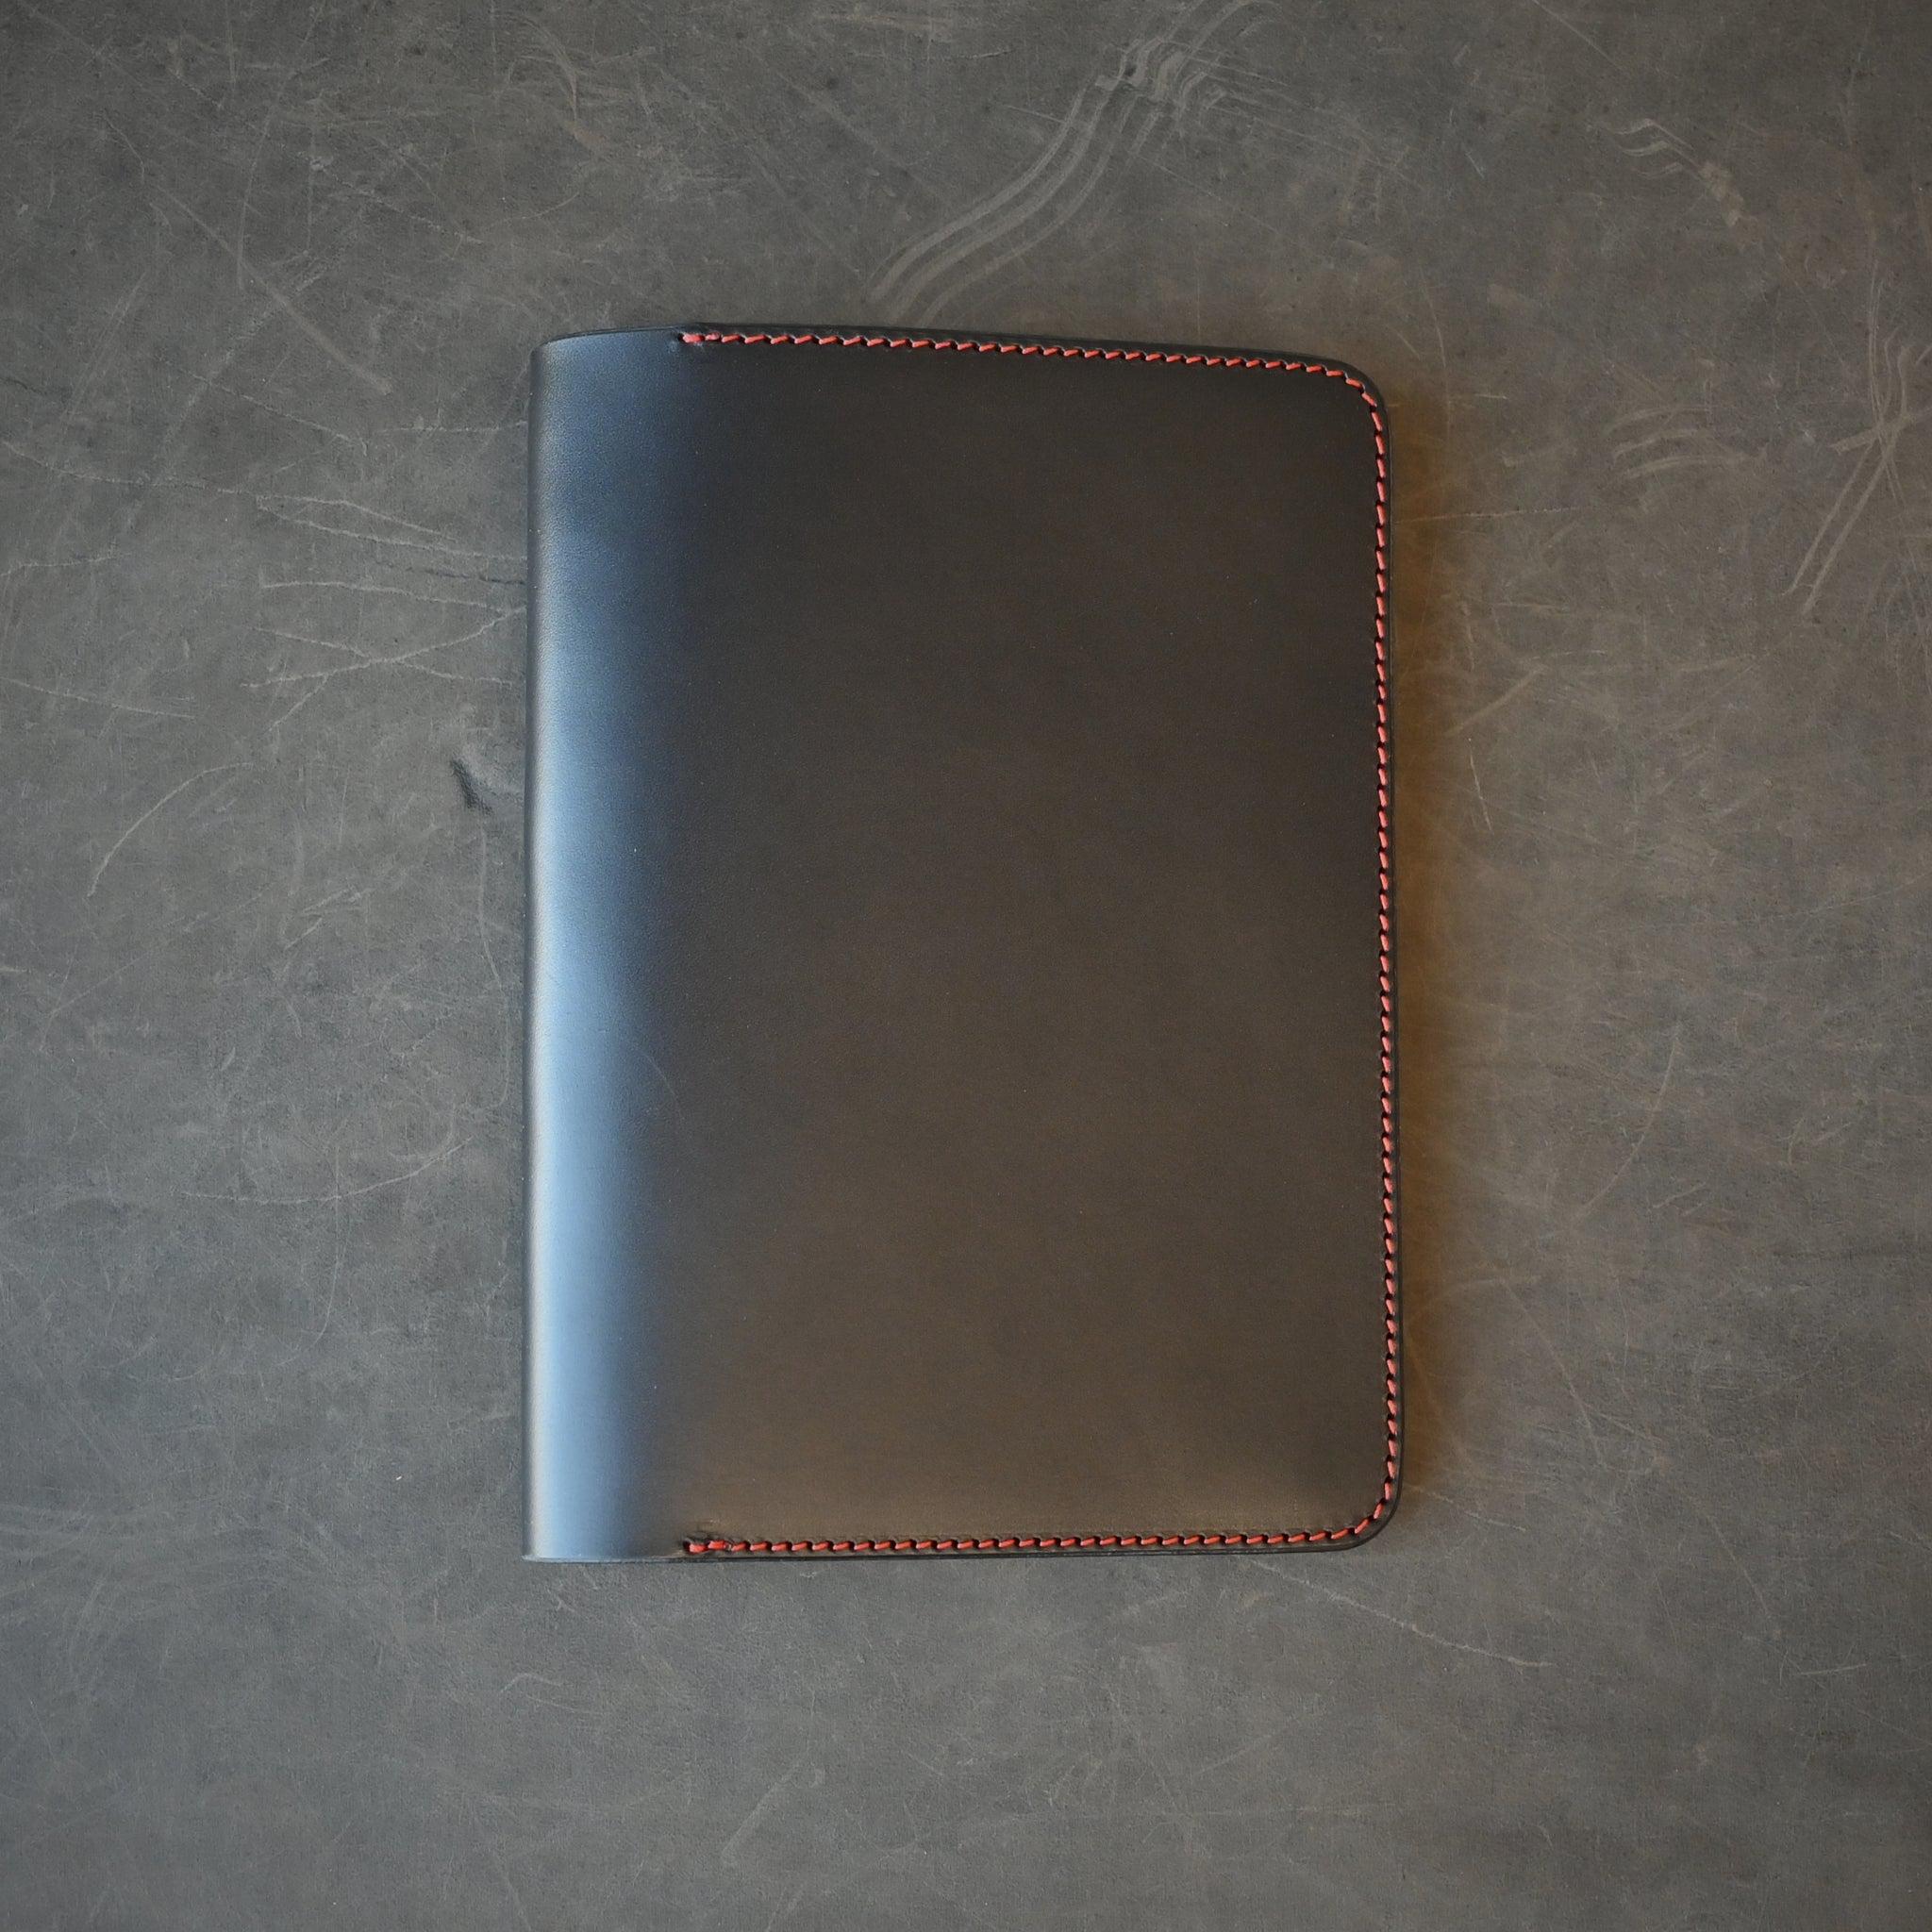 Ready To Ship A5 Leather Notebook Cover Black W/ Orange Thread